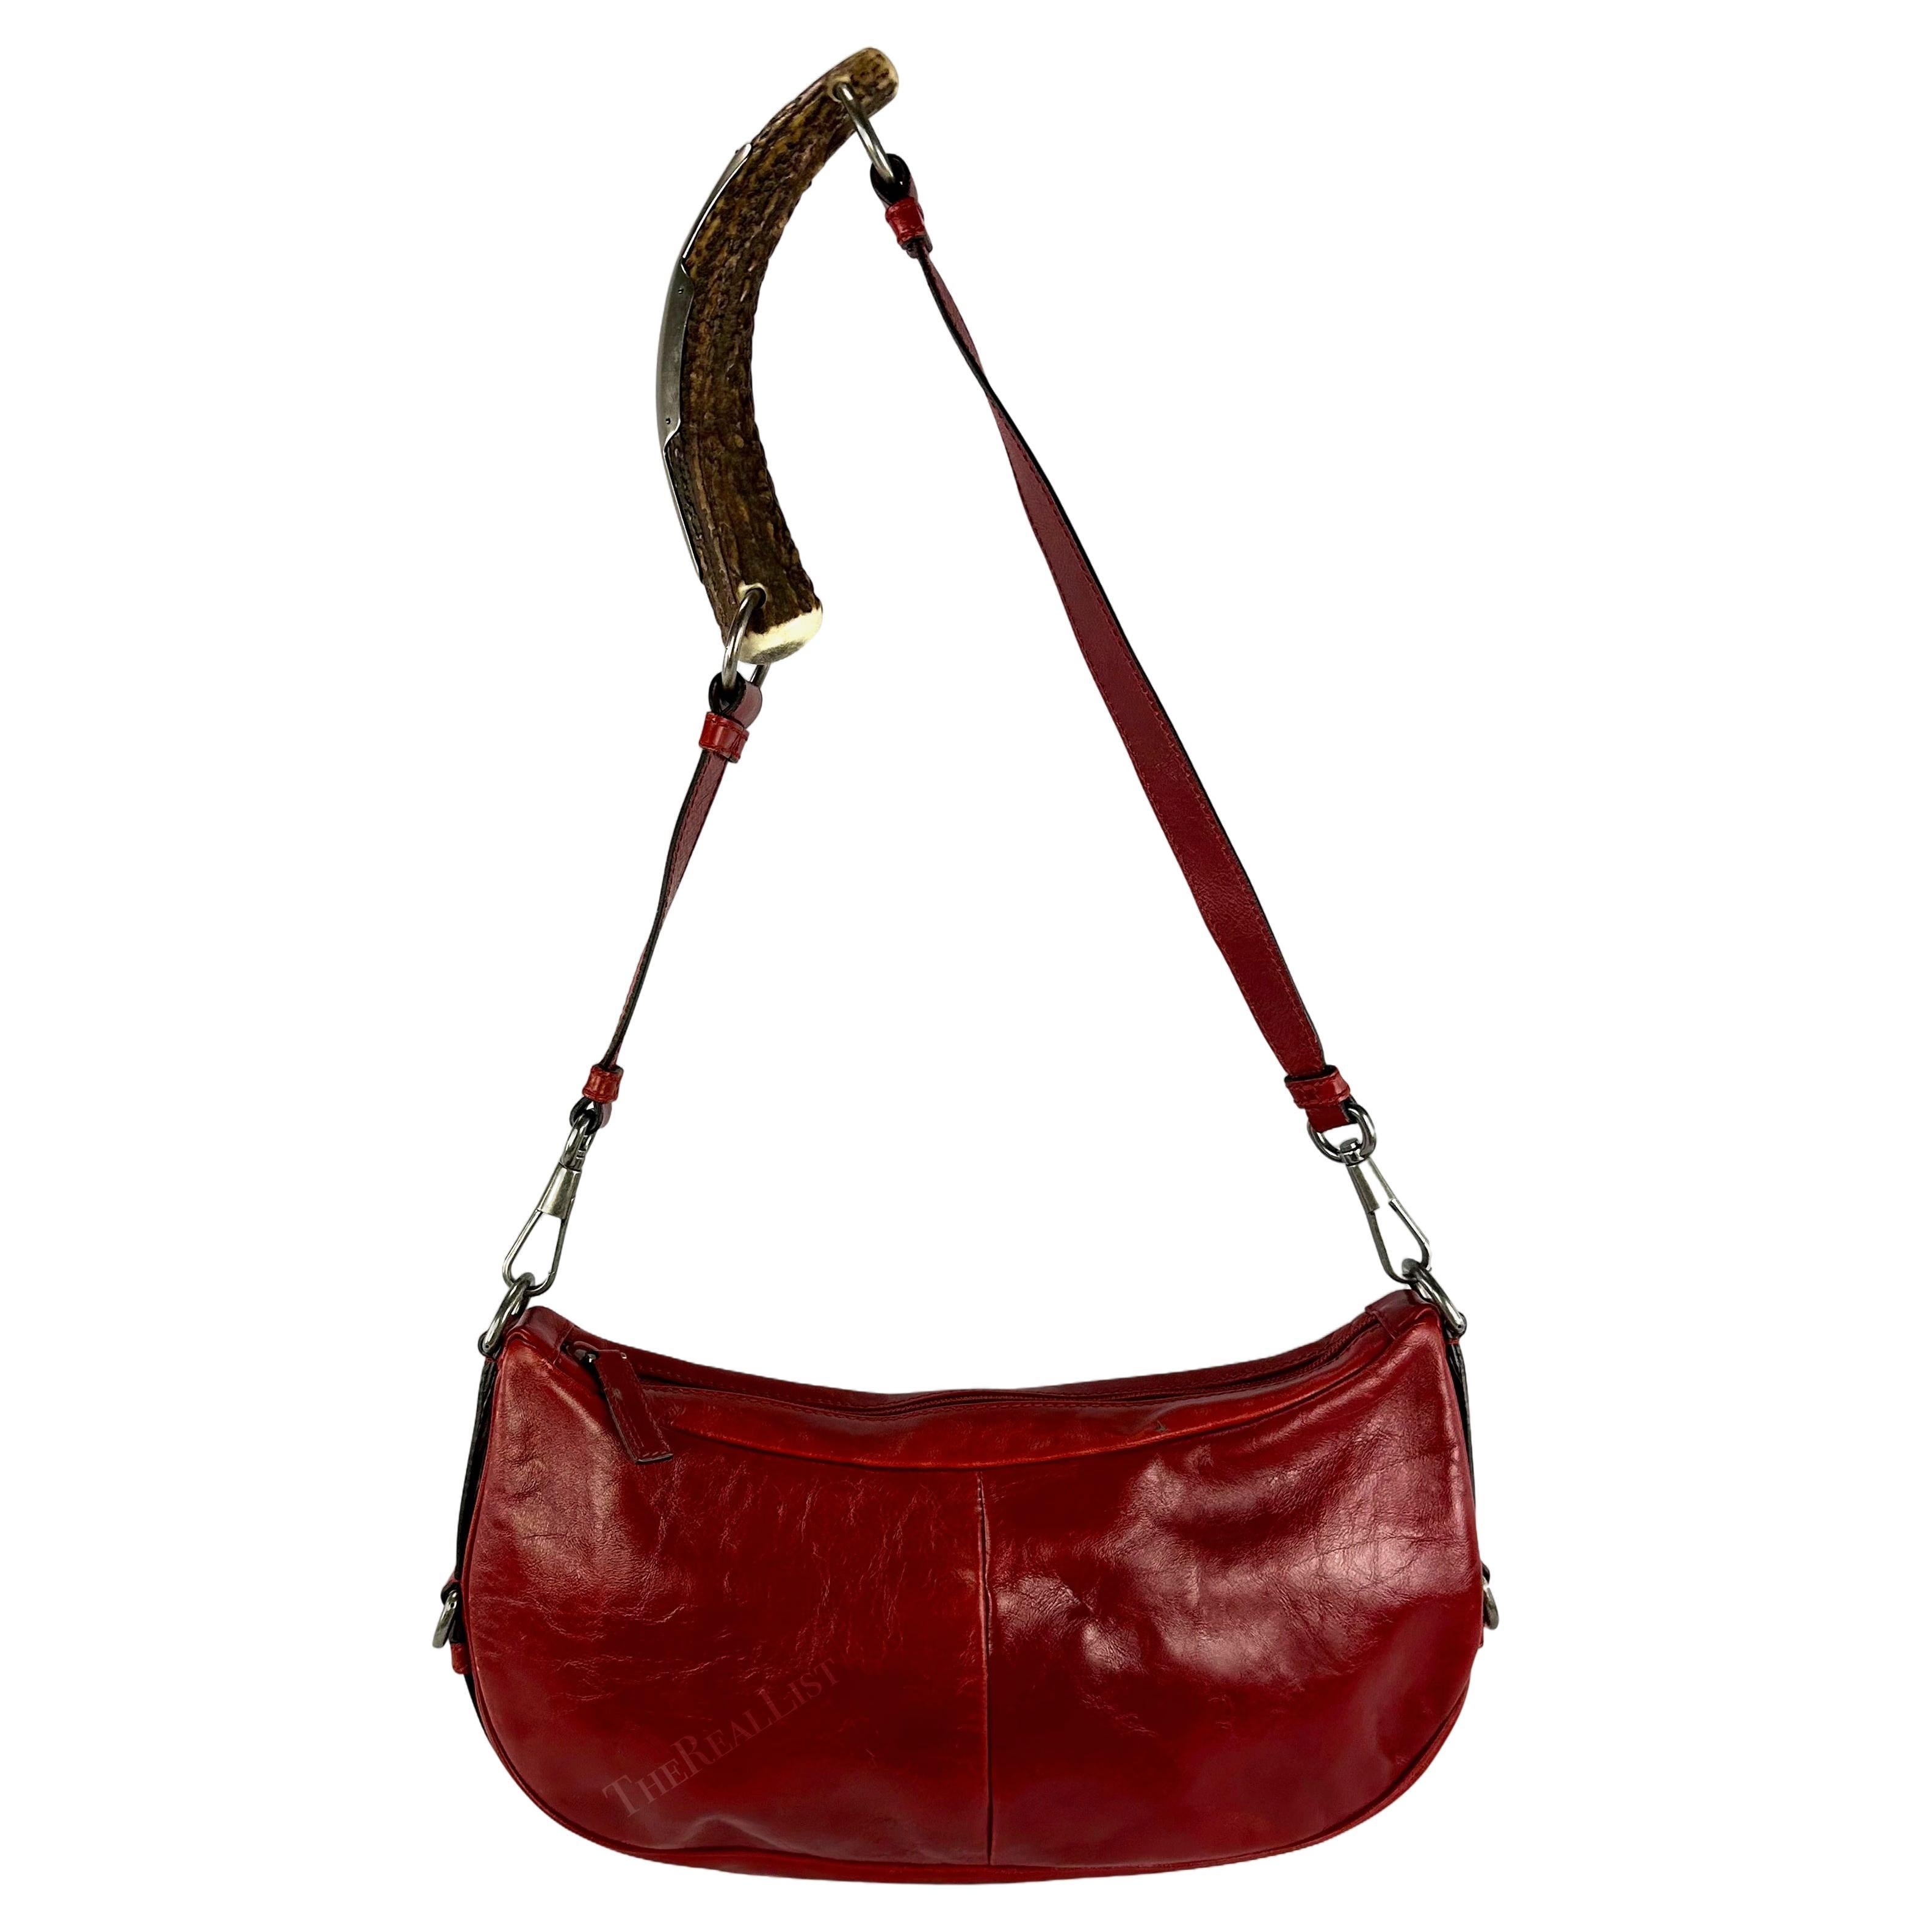 2000s Yves Saint Laurent by Tom Ford Red Leather Mombassa Shoulder Bag For Sale 3